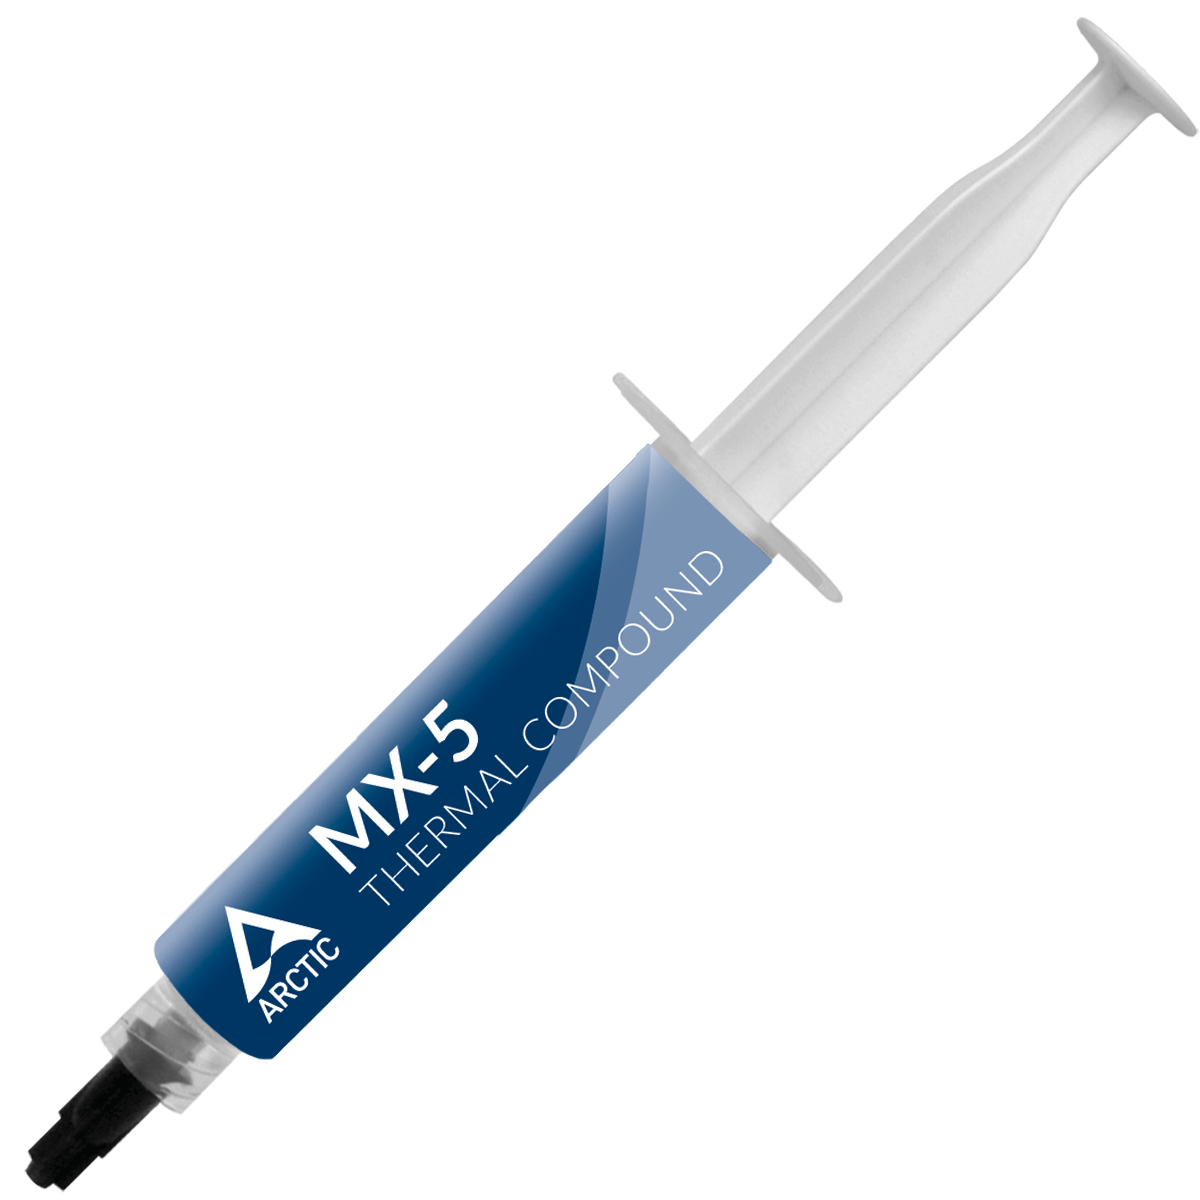 Arctic MX-5 50g - High Performance Thermal Compound - Arctic 2.35.64.01.017